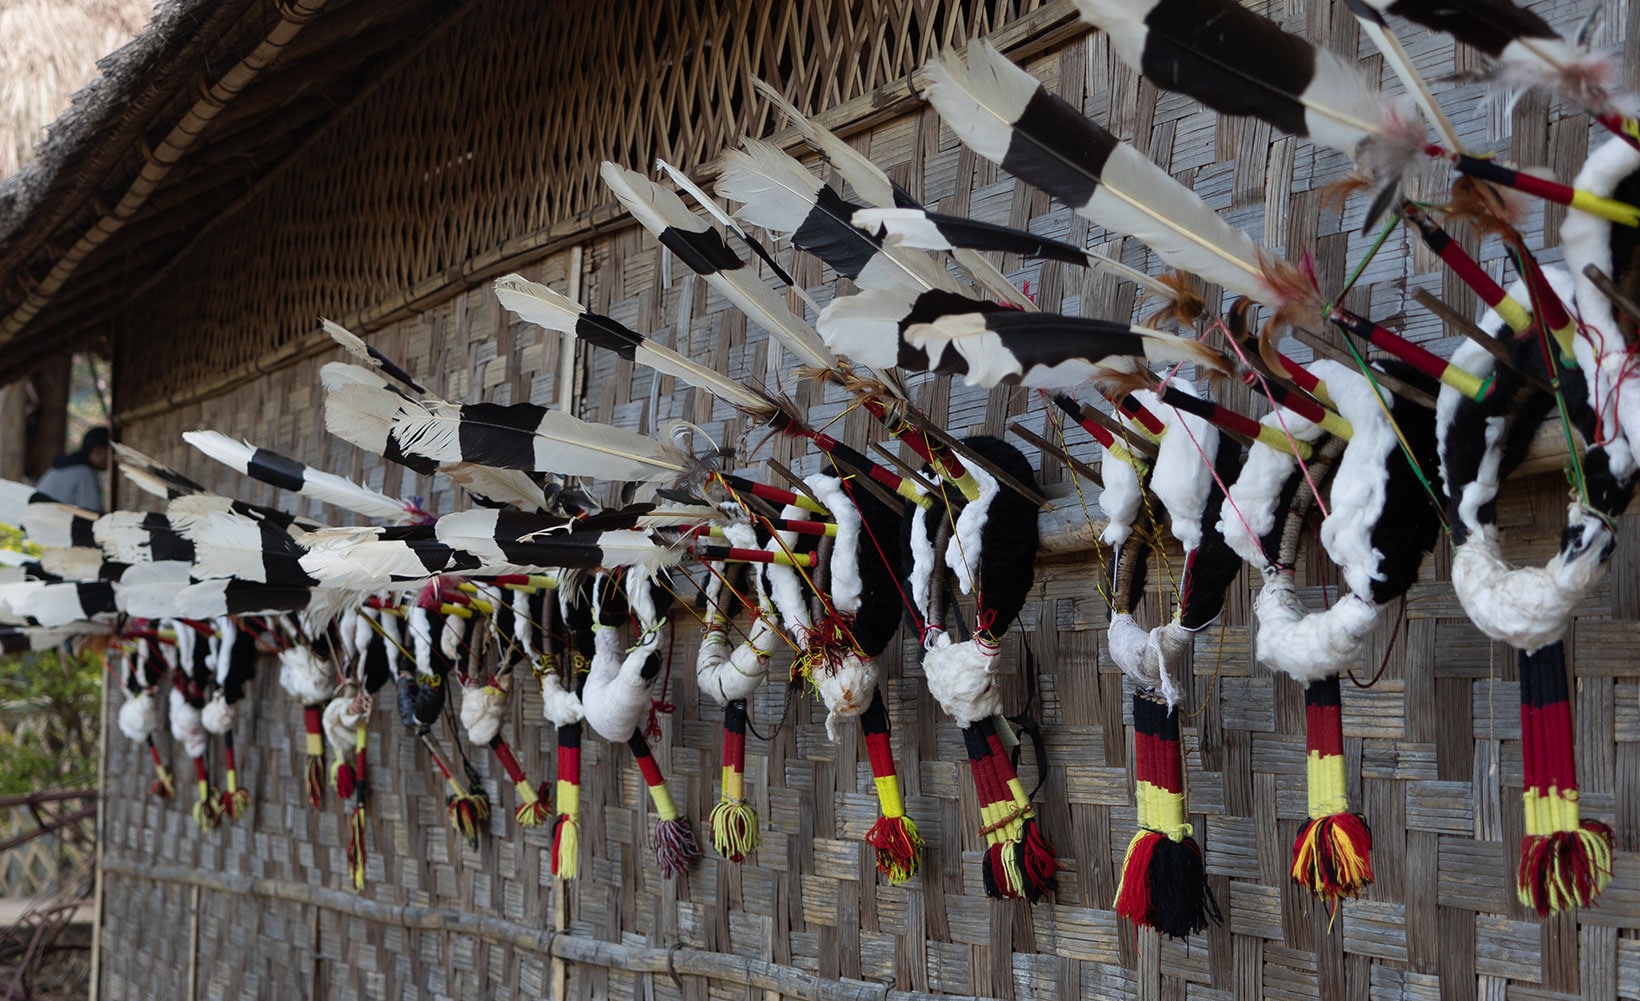 5 surprising facts that you didn’t know about the HornBill Festival